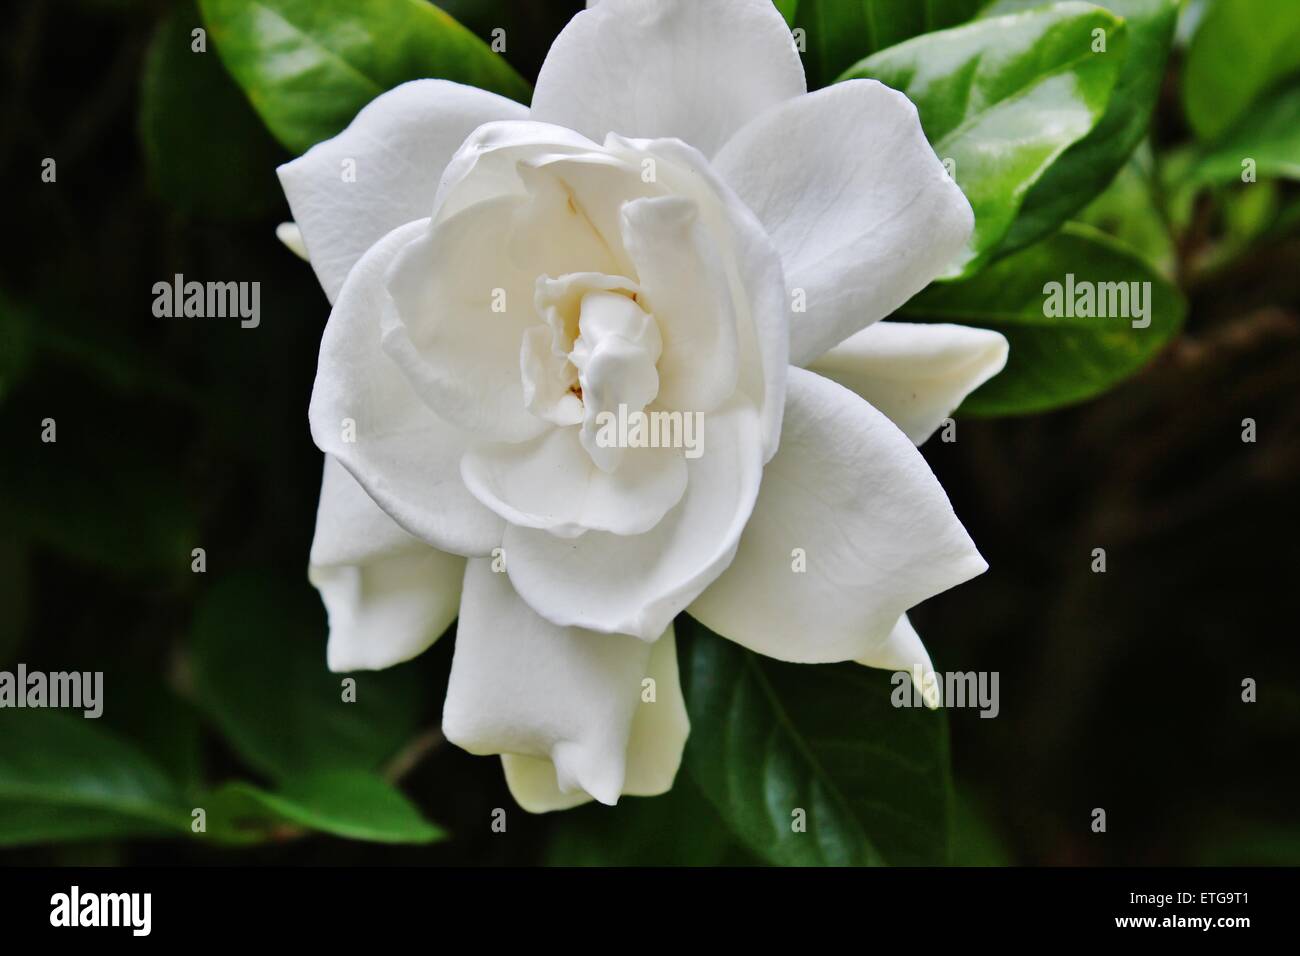 White flower in Central Florida Stock Photo